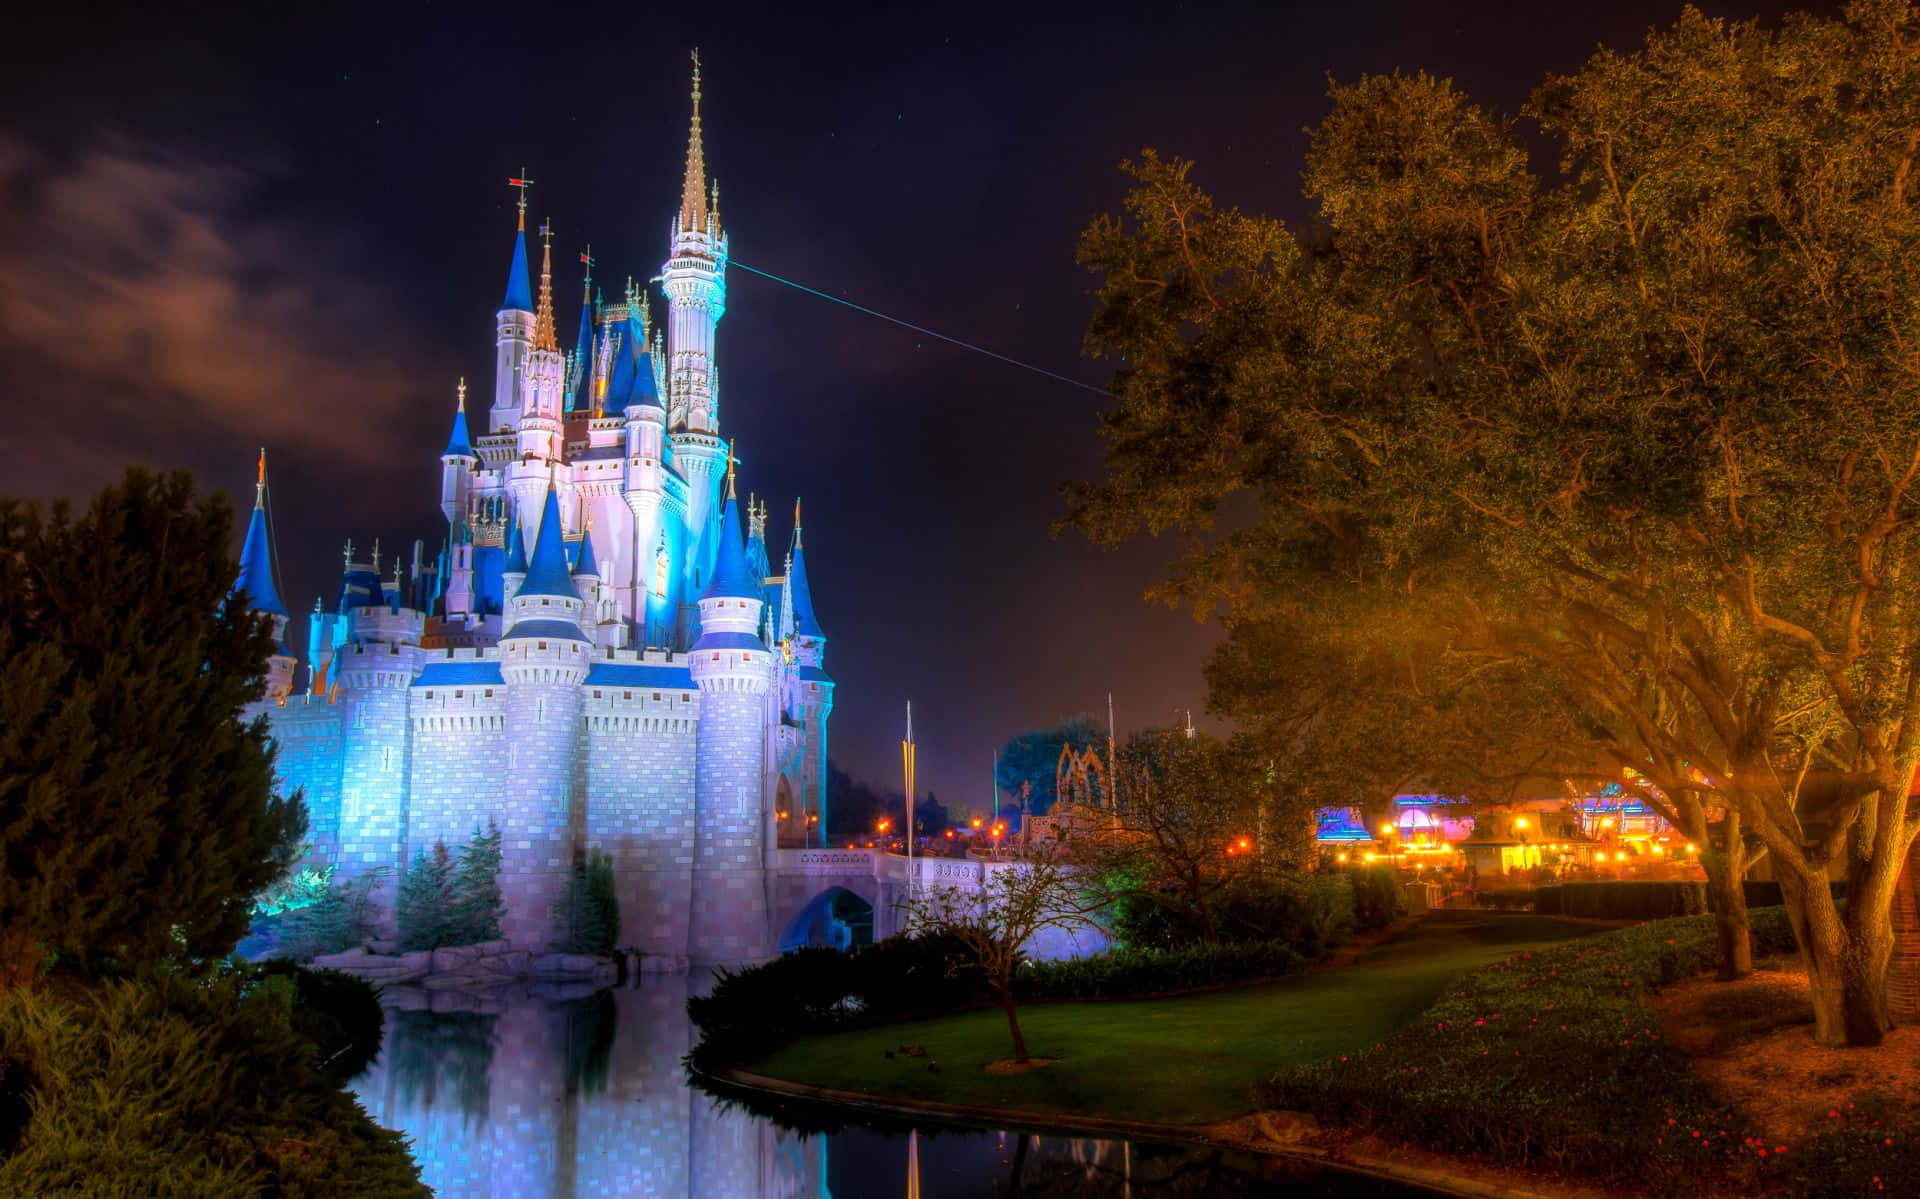 Cinderella Castle At Night With A Pond